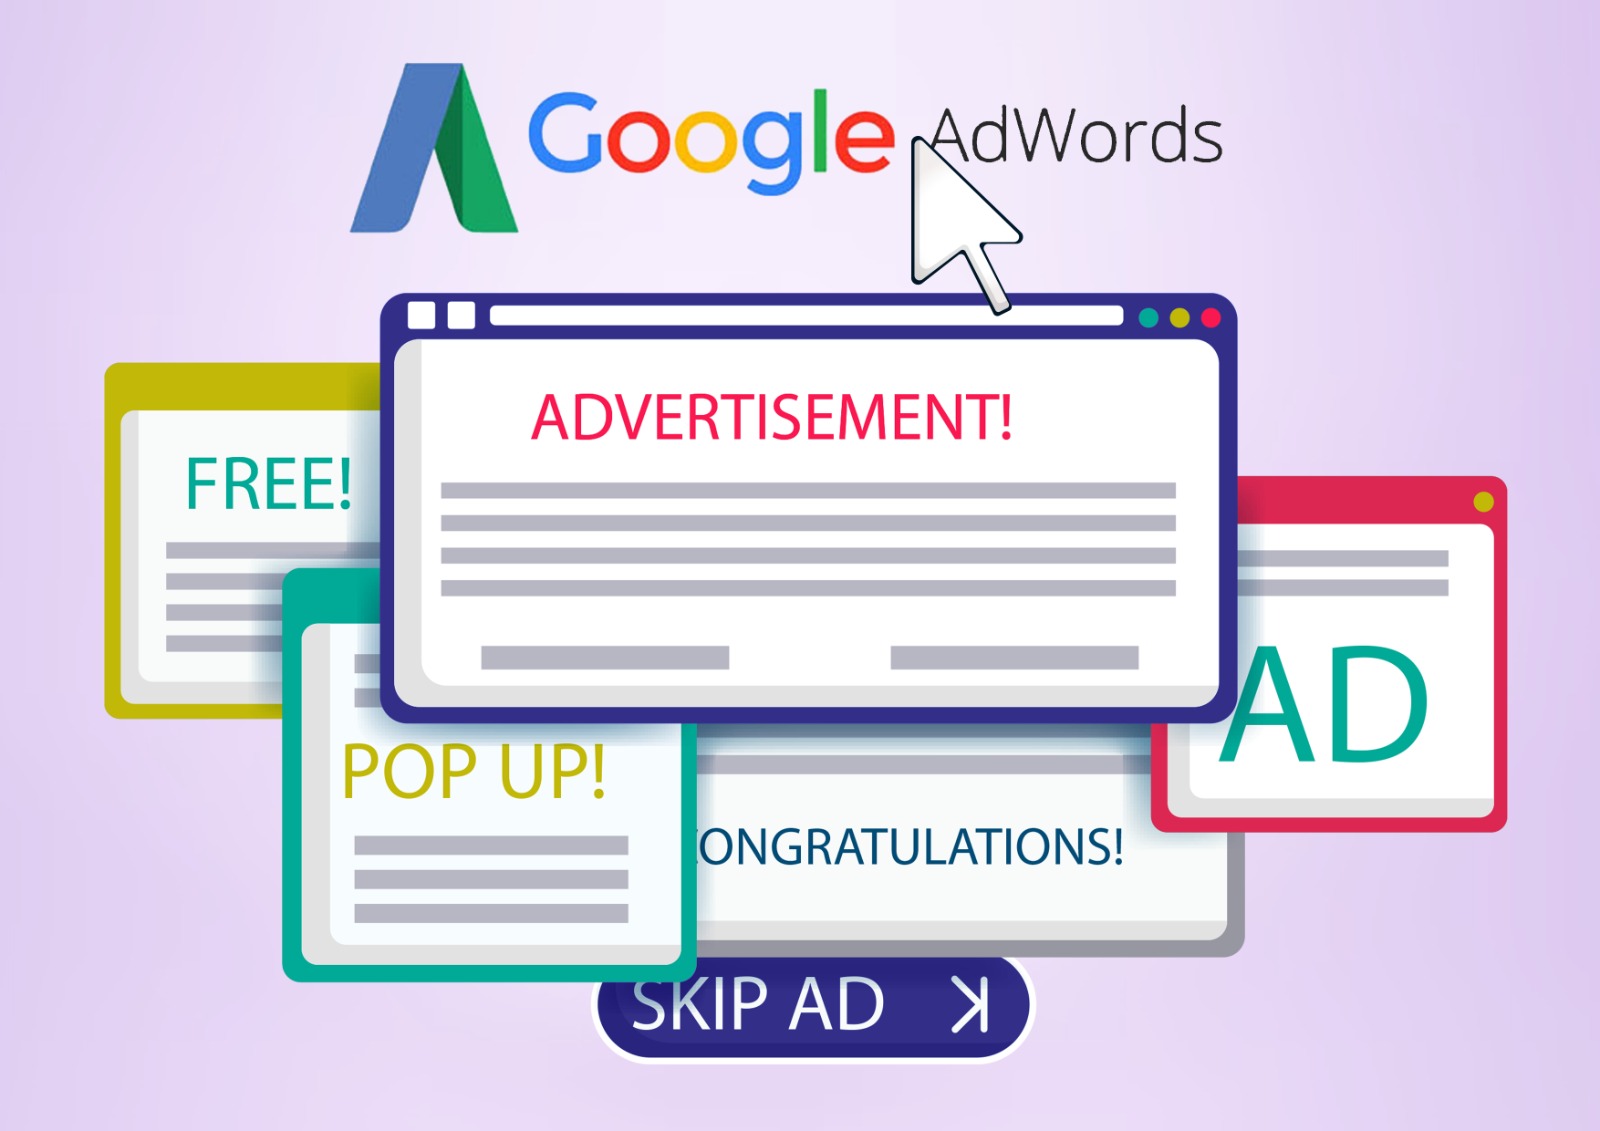 How To Build A Career In Google AdWords? Learn Google AdWords Course By Certify Trainer